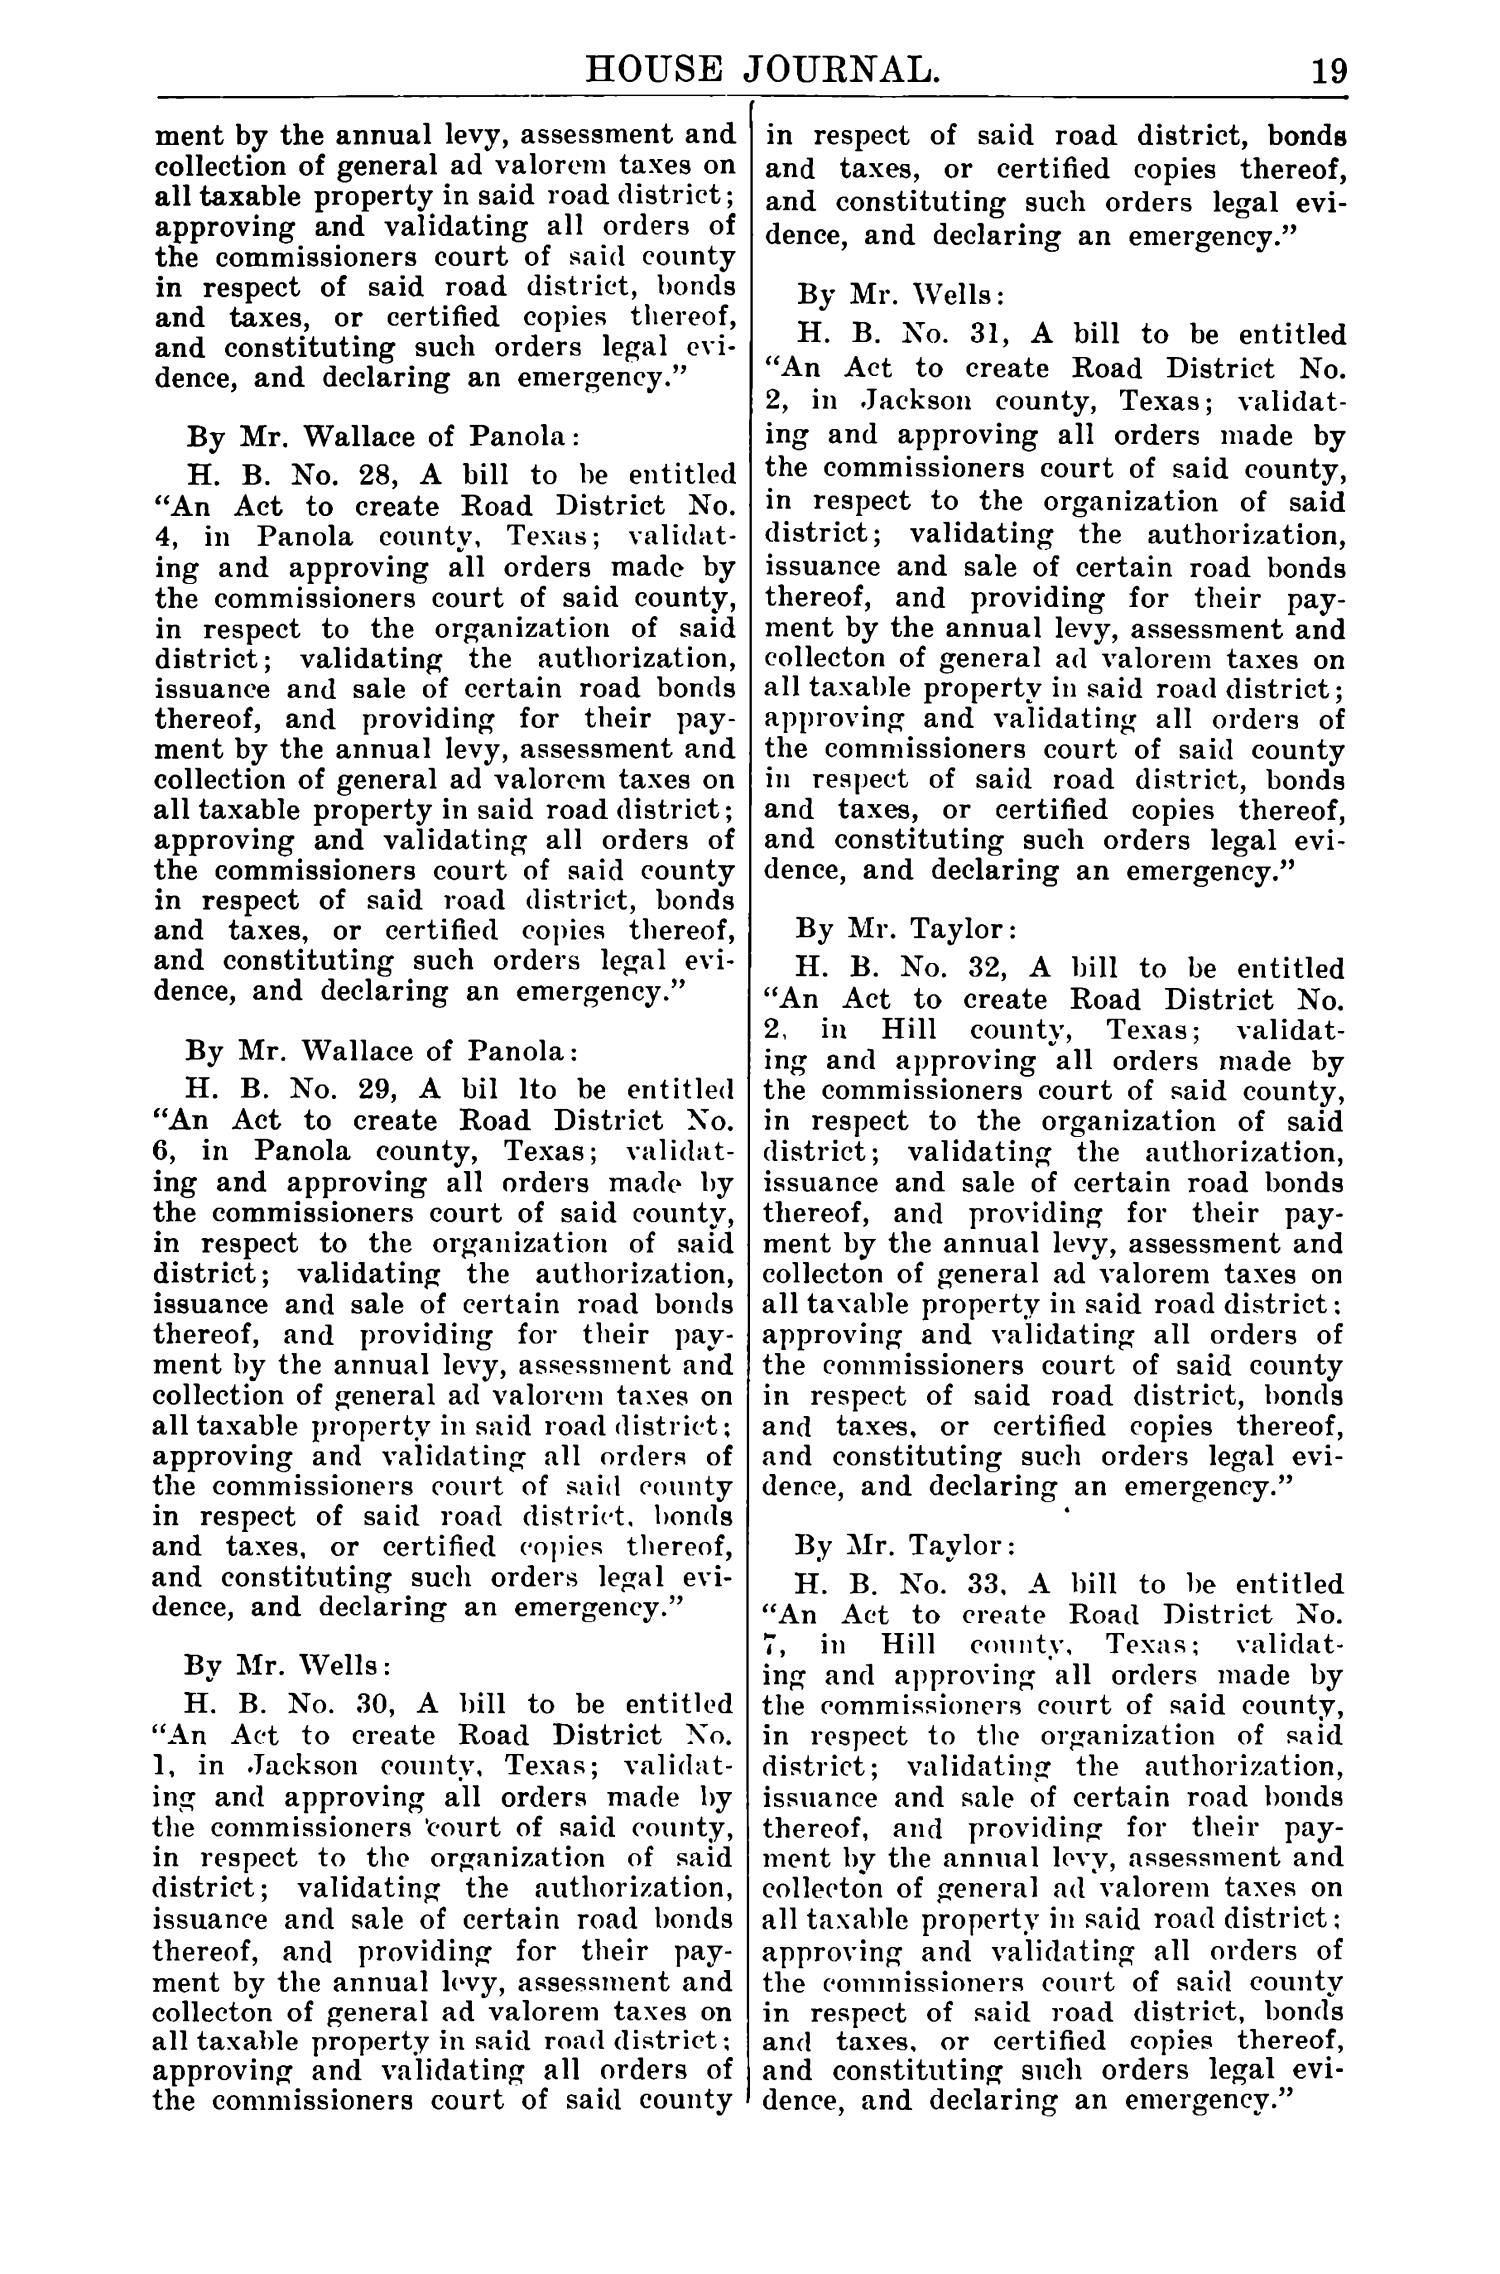 Journal of the House of Representatives of the First Called Session of the Thirty-Ninth Legislature of the State of Texas
                                                
                                                    19
                                                